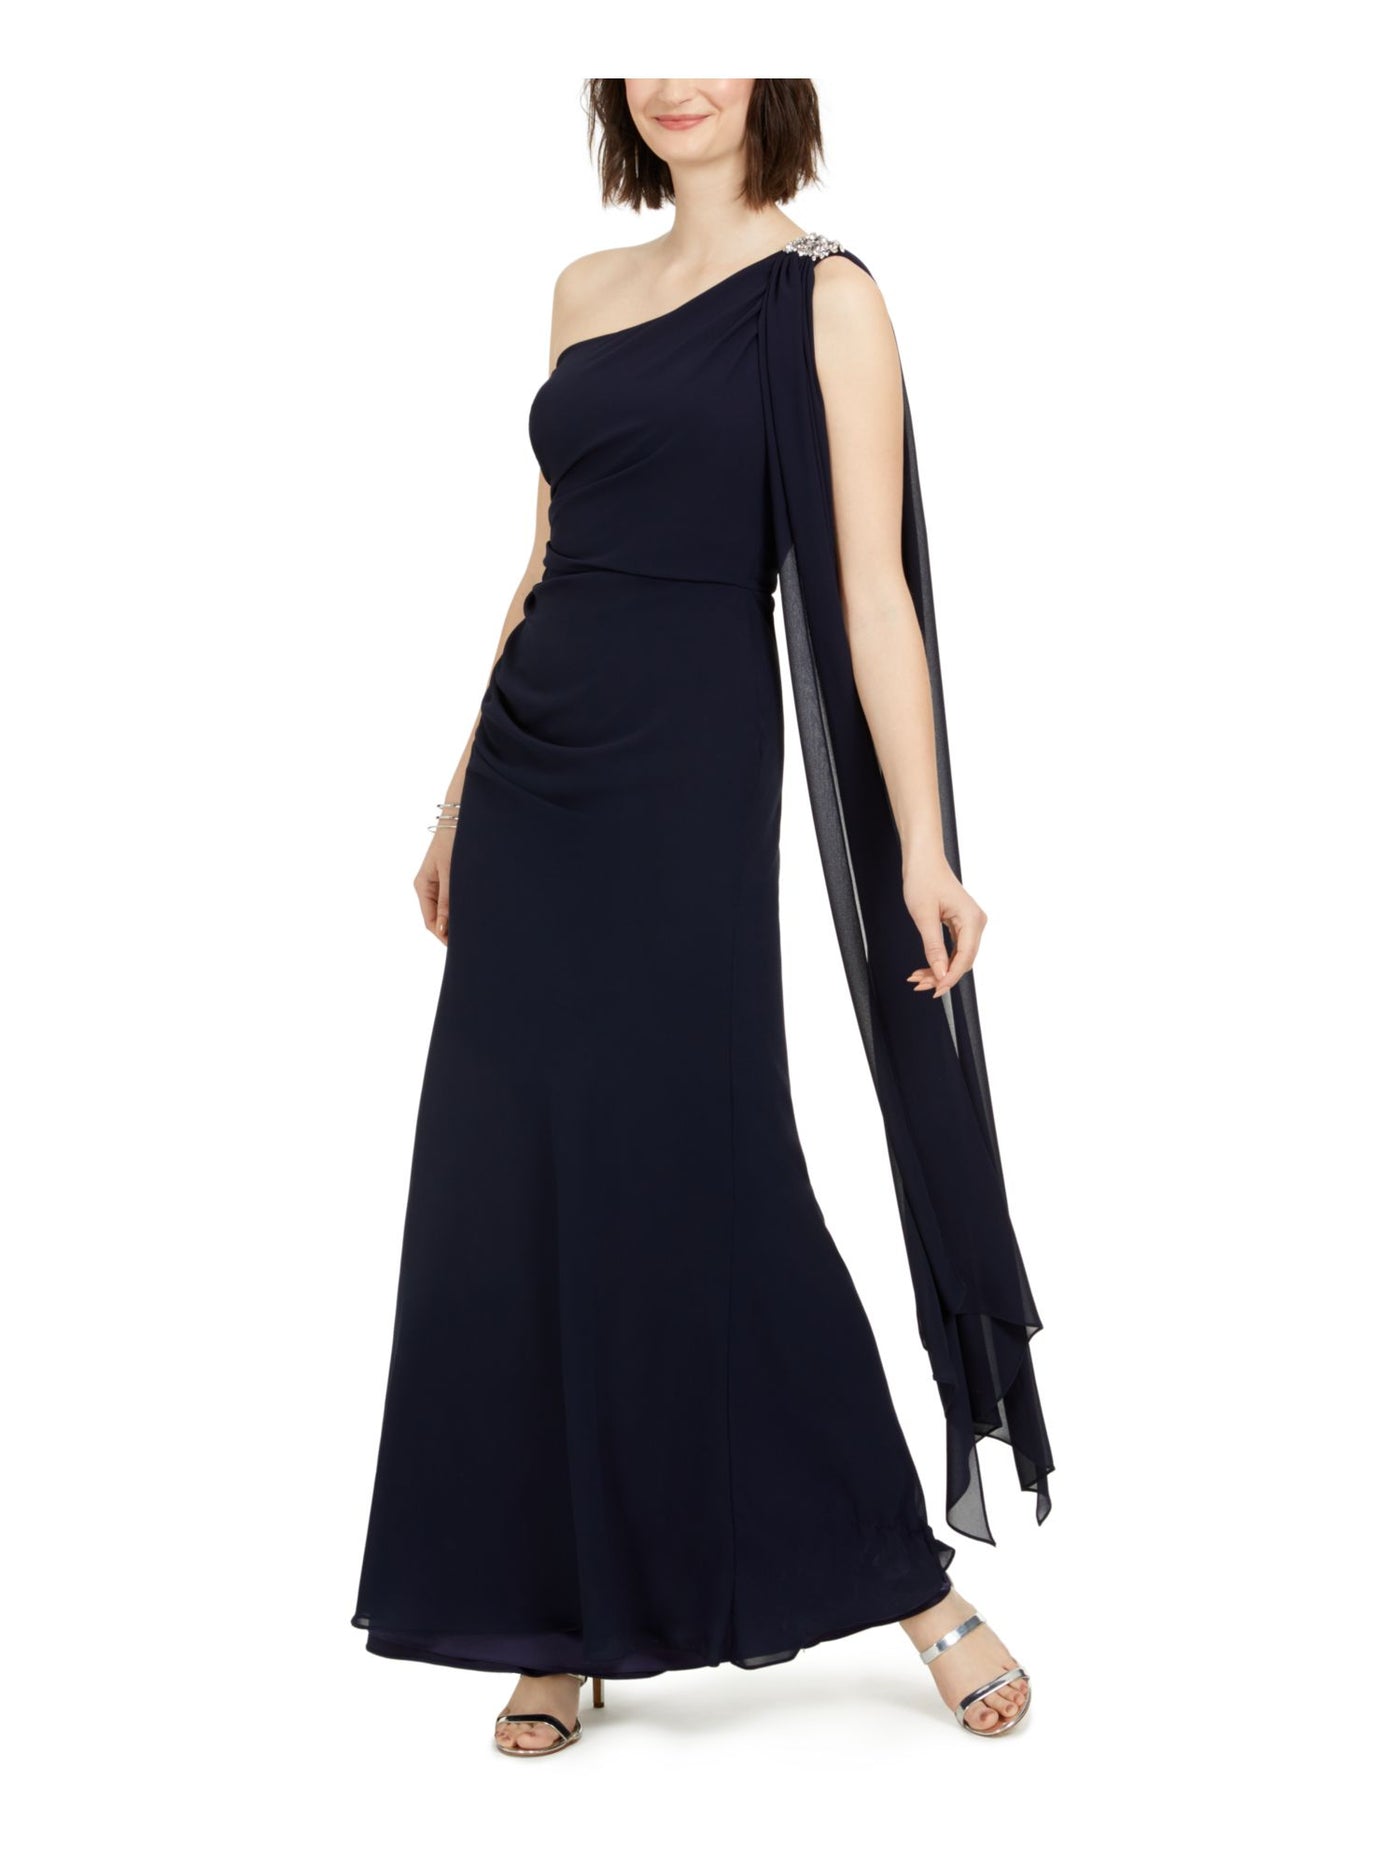 VINCE CAMUTO Womens Navy Stretch Embellished Zippered One-shoulder Chiffon Gown Sleeveless Asymmetrical Neckline Maxi Formal Dress Petites 8P